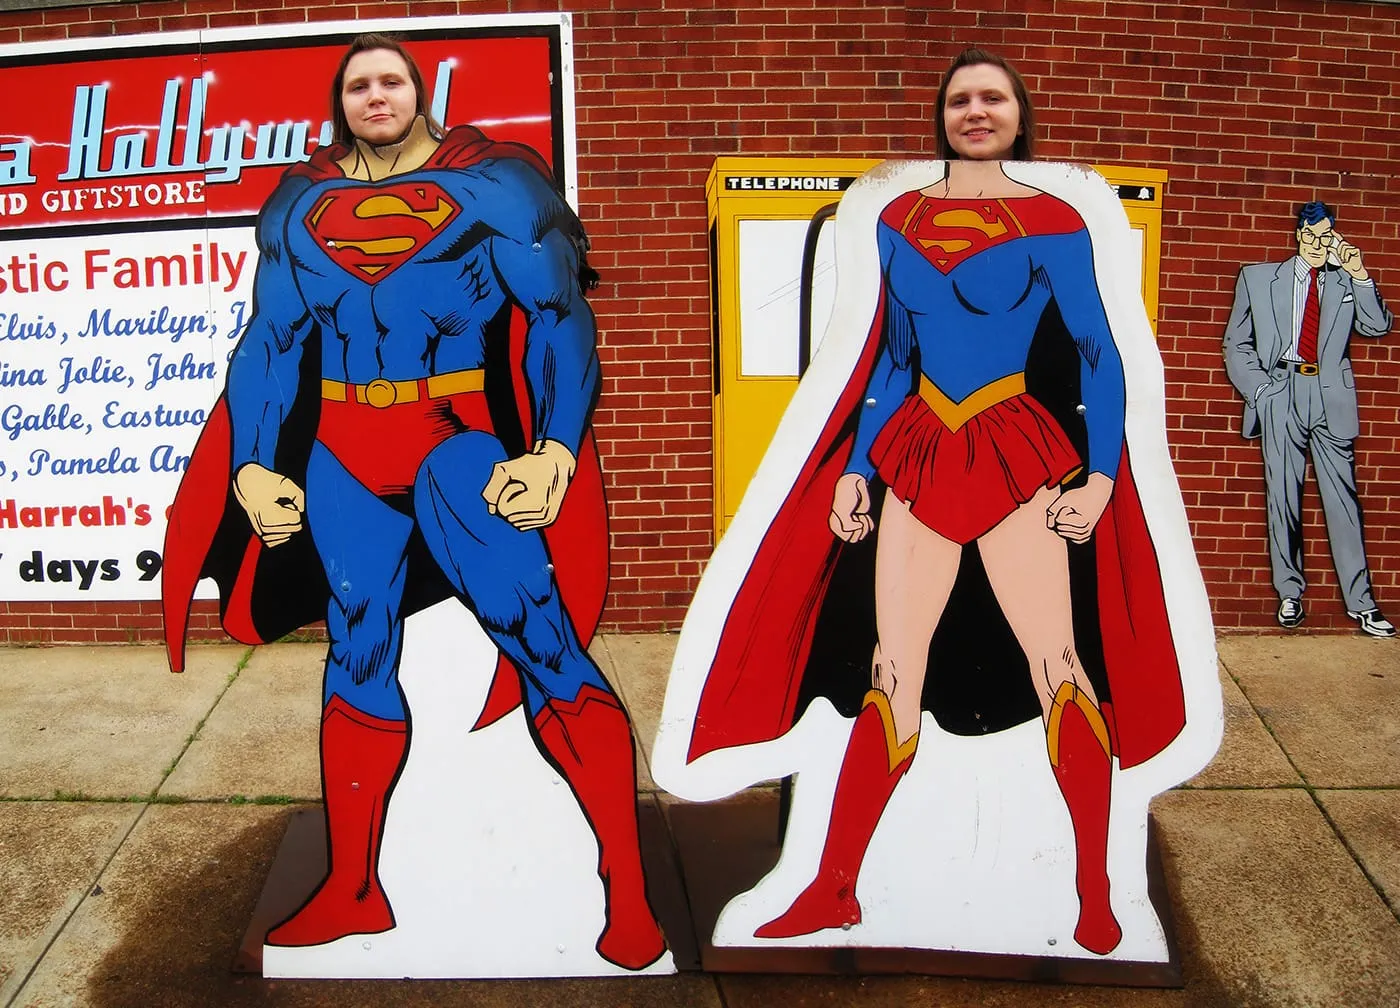 Superman Photo Ops - Superman and Supergirl photo ops outside of the Super Museum in Metropolis, Illinois.